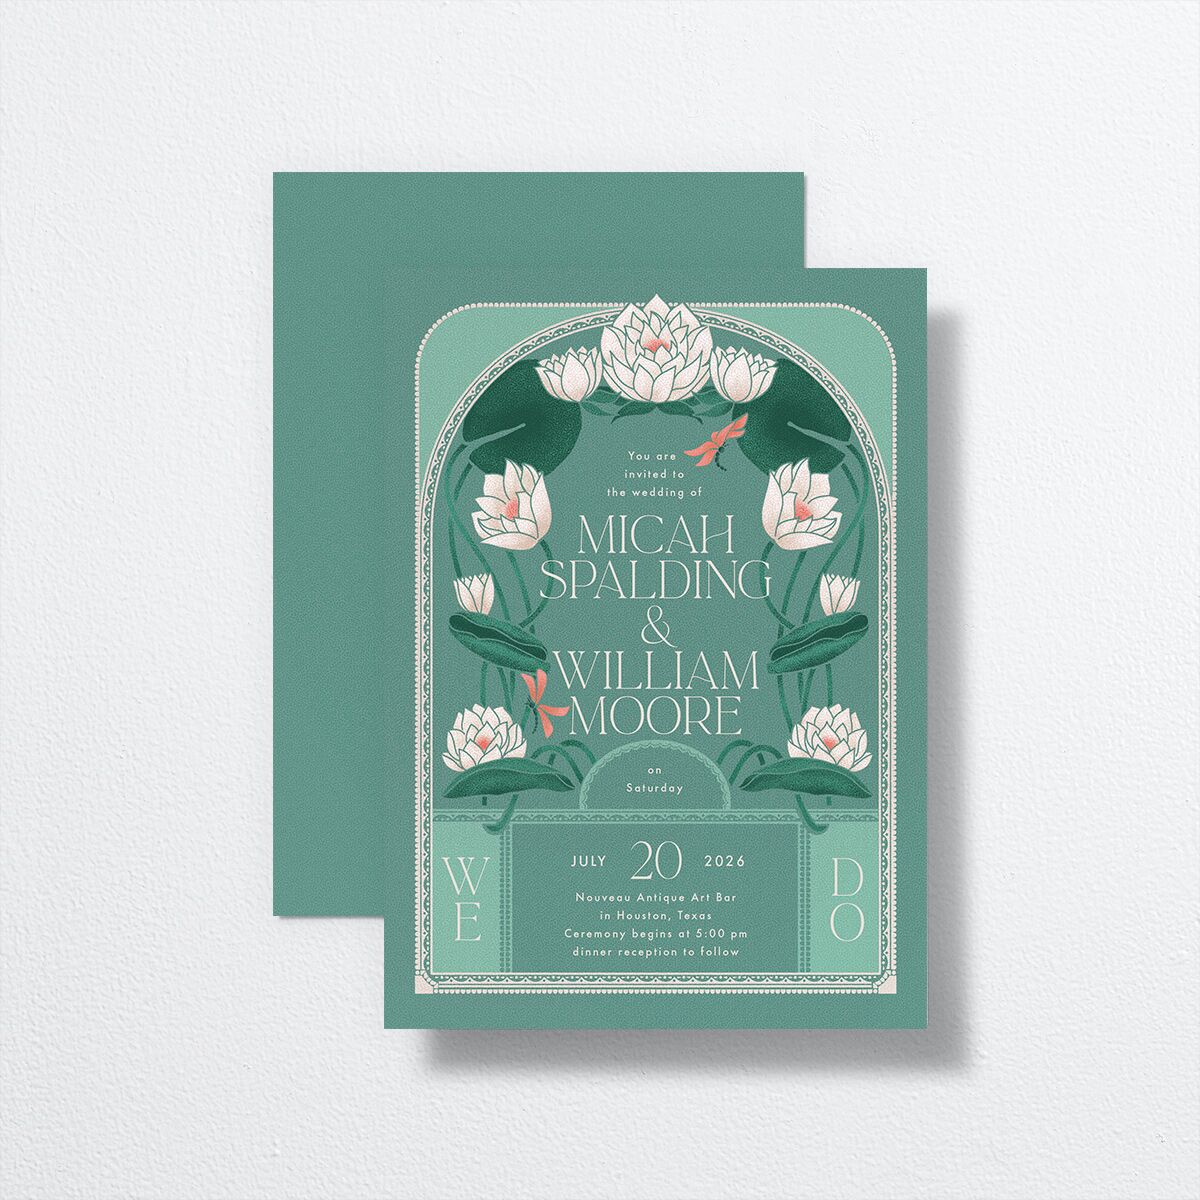 Twilight Pond Wedding Invitations front-and-back in teal